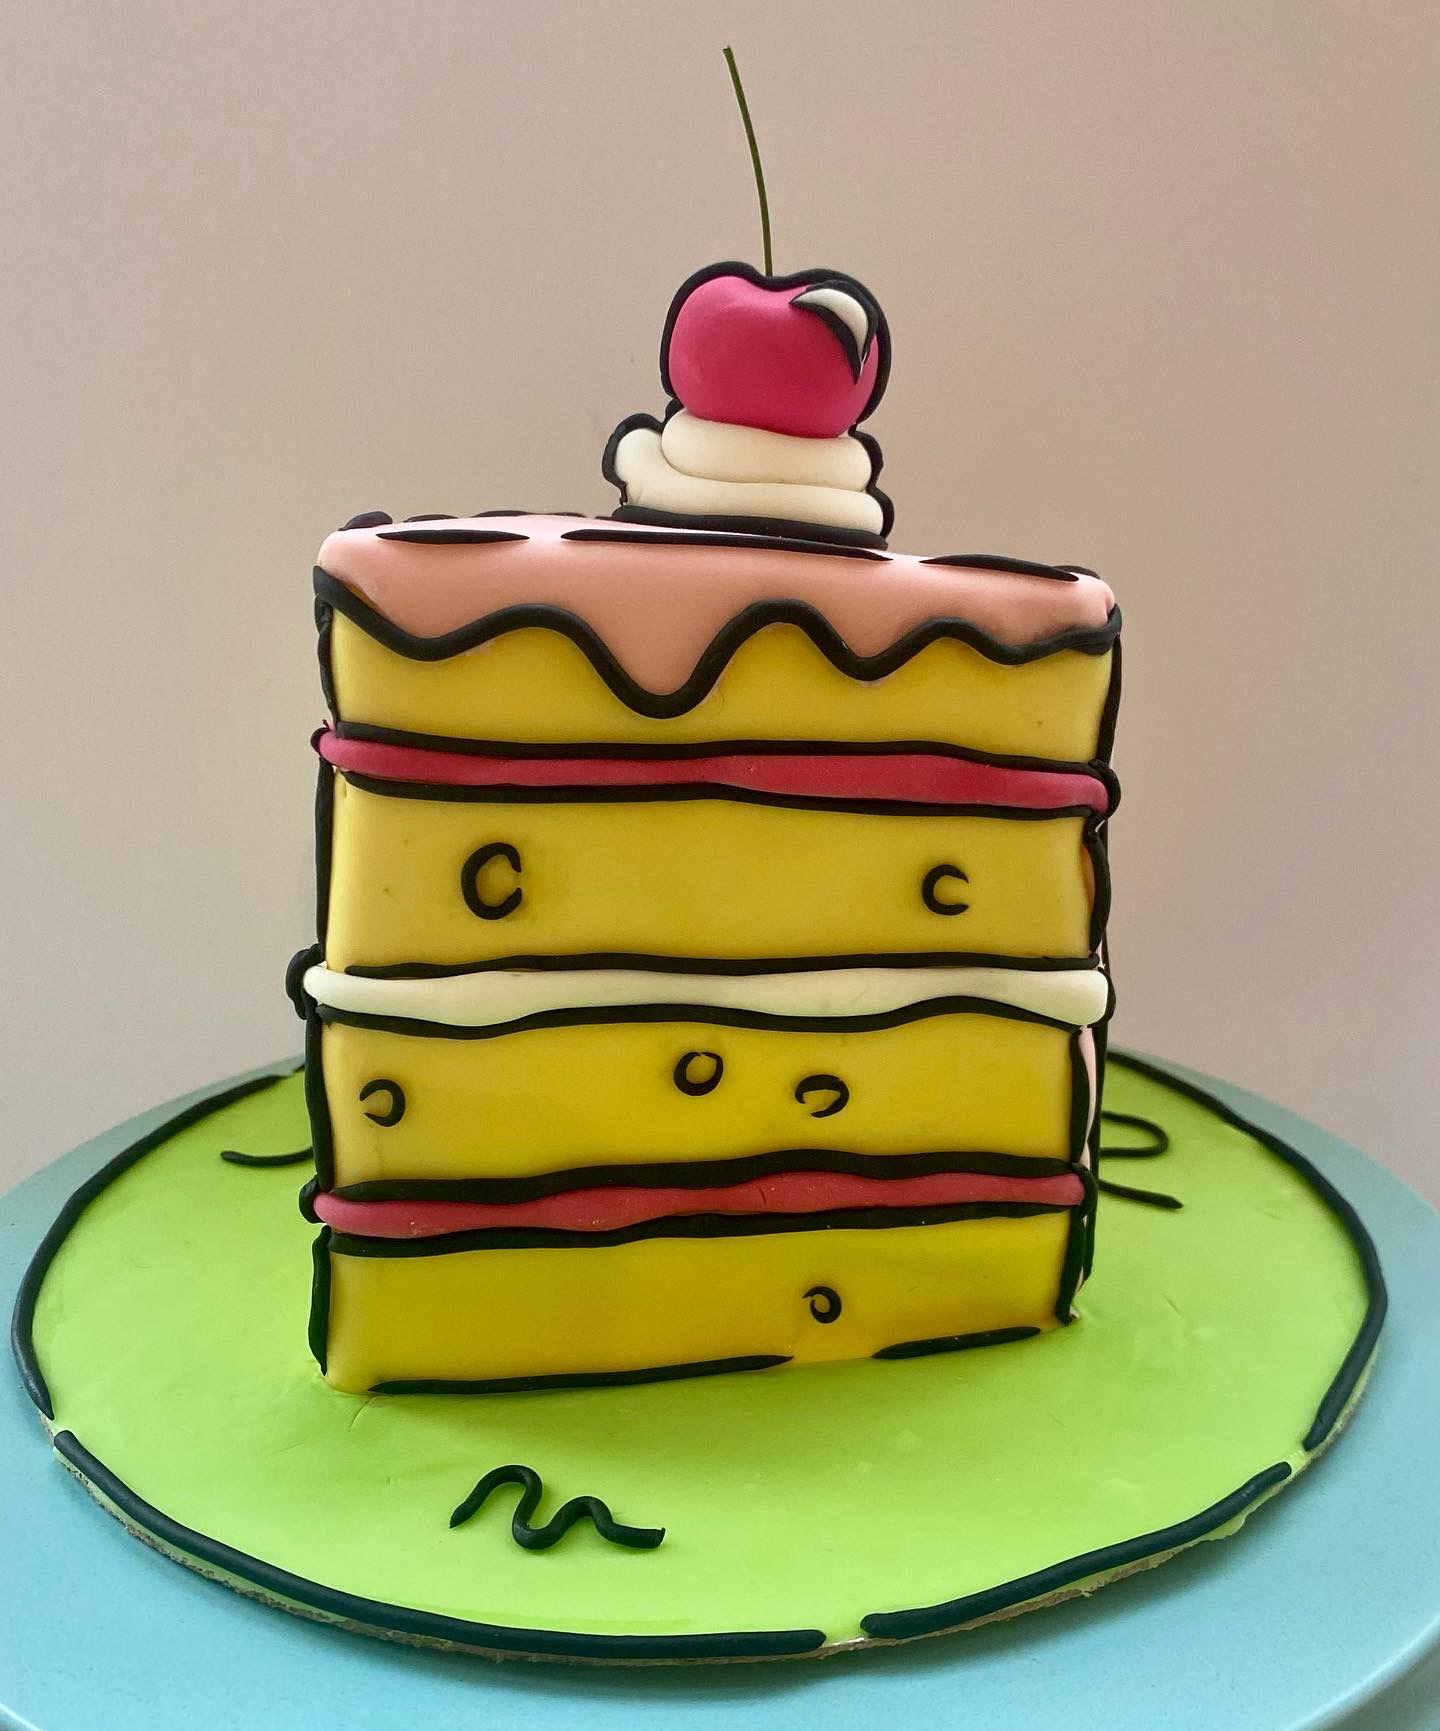 Buy Comic Cake Online | 2D Cake Delivery | Customisable Cake